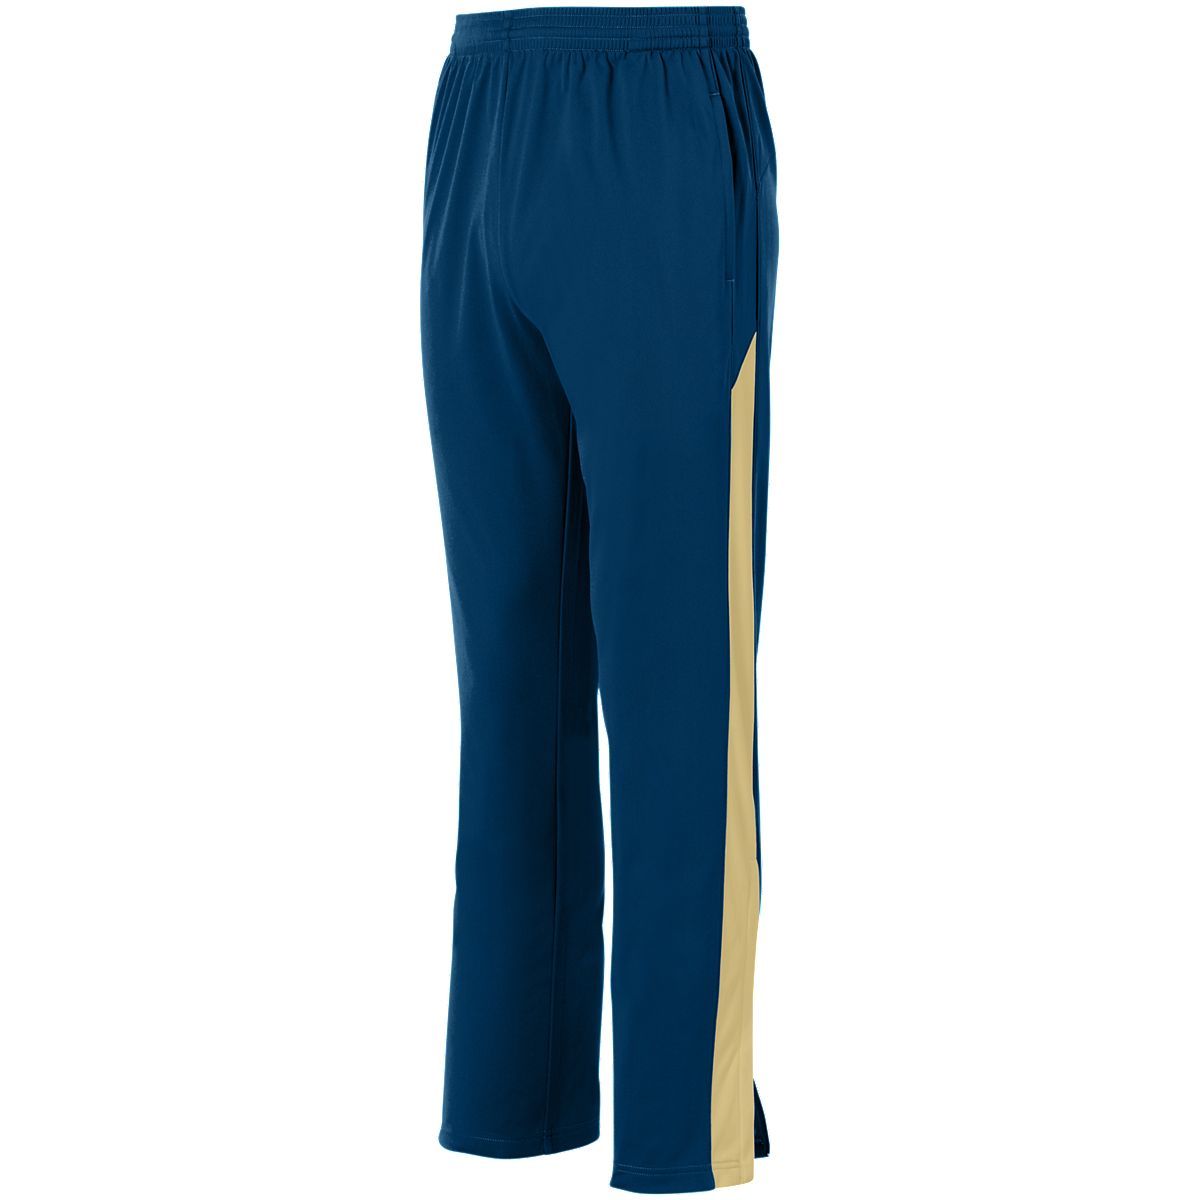 Augusta Sportswear Youth Medalist Pant 2.0 in Navy/Vegas Gold  -Part of the Youth, Youth-Pants, Pants, Augusta-Products product lines at KanaleyCreations.com